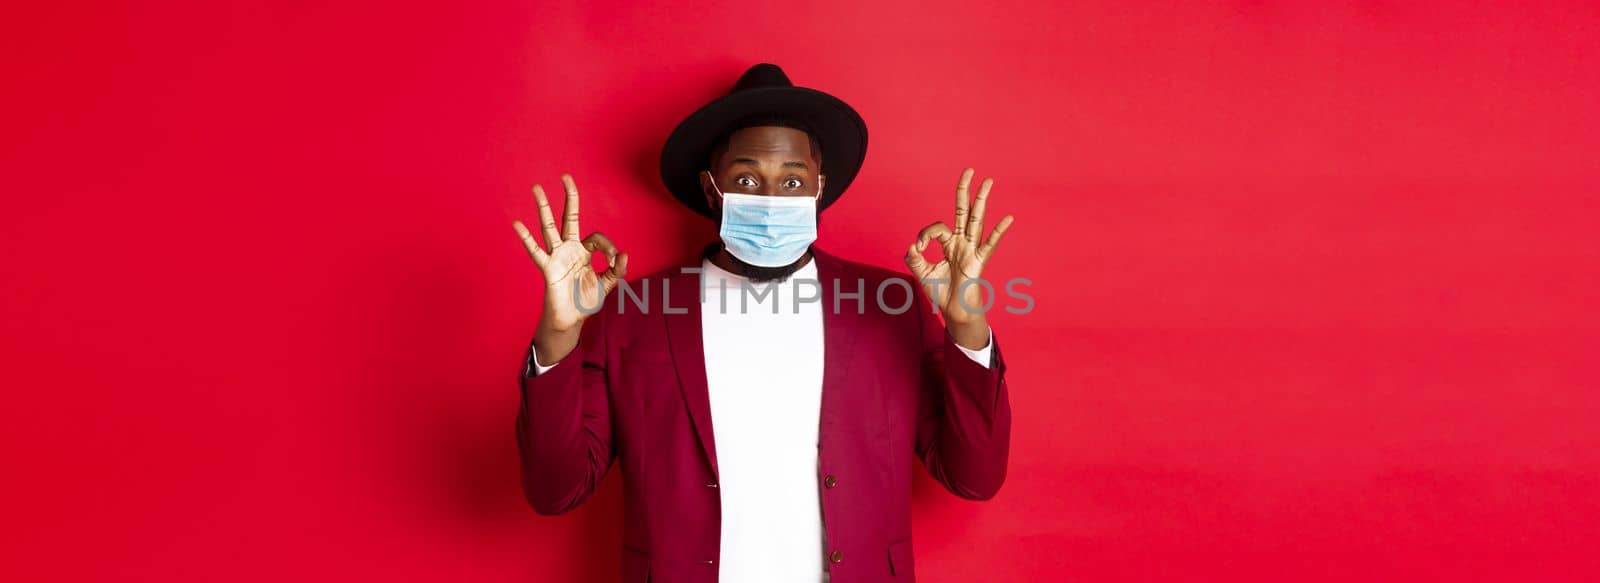 Covid-19 and fashion concept. Stylish african american man in hat and blazer, wearing face mask and showing okay sign, standing over red background.